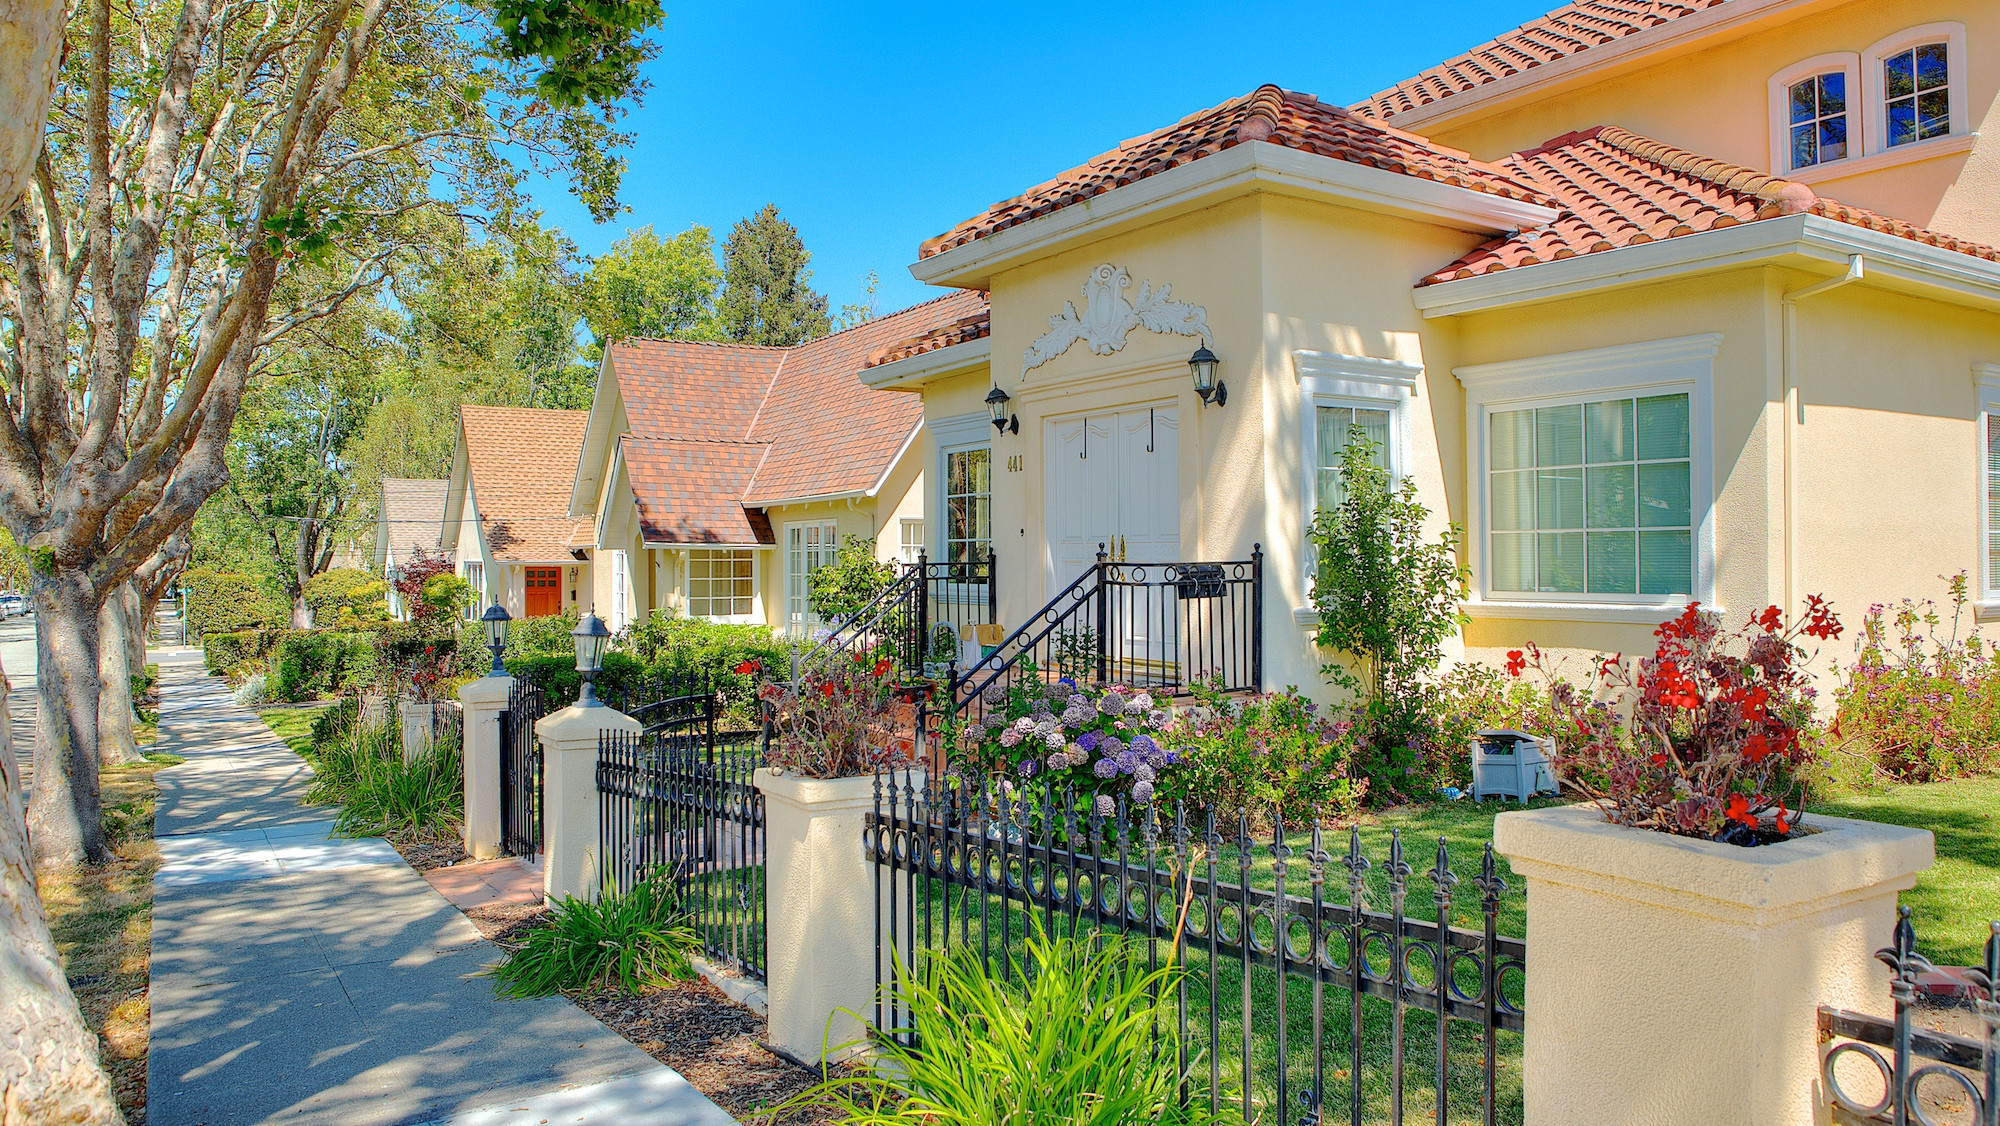 Spanish style house with iron fence and cement columns in San Mateo.